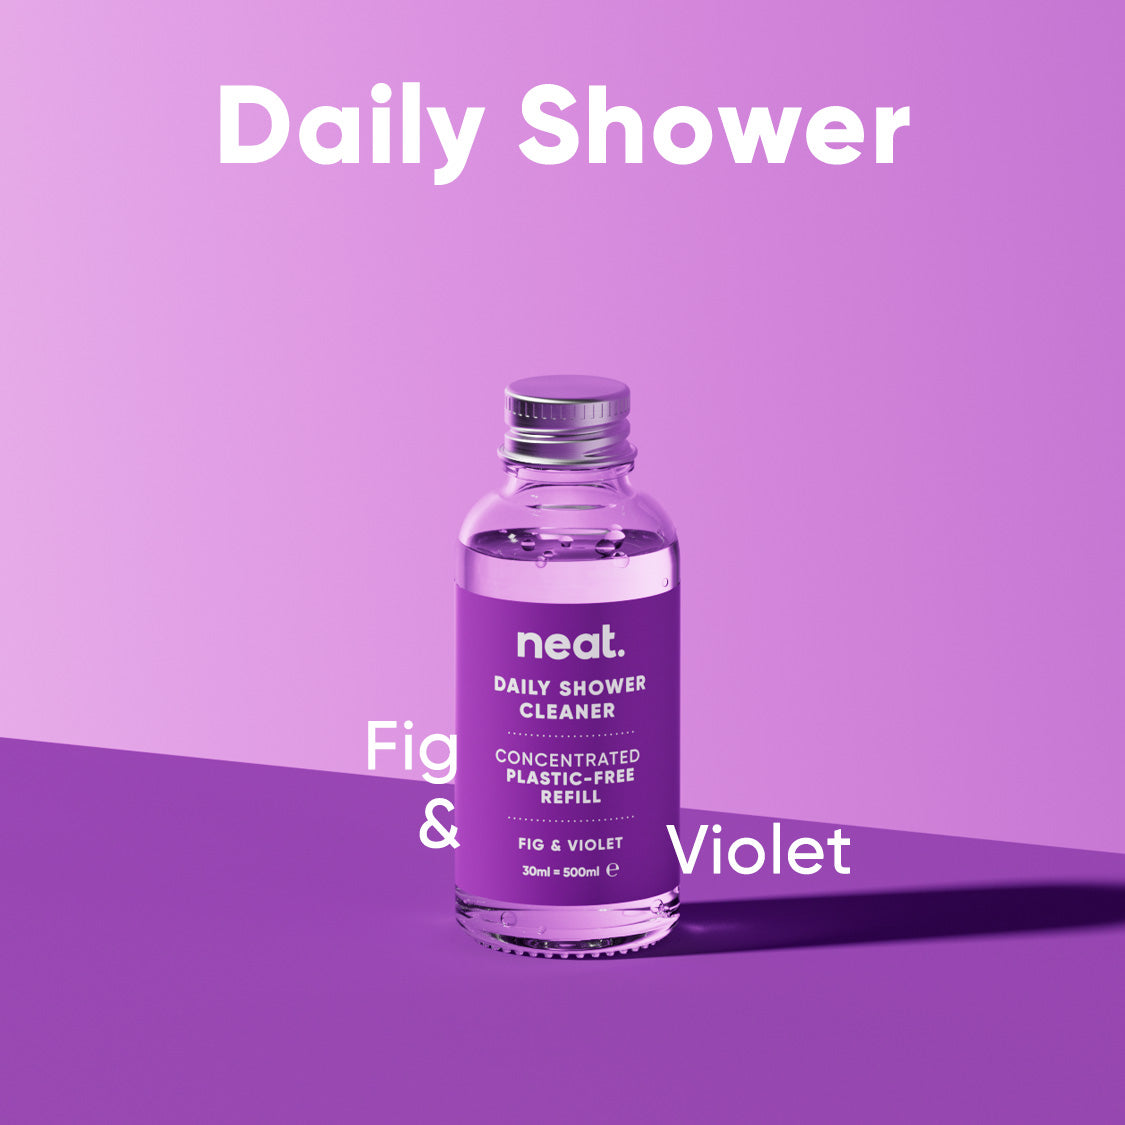 12x Daily Shower Refill - Fig & Violet (1 case)